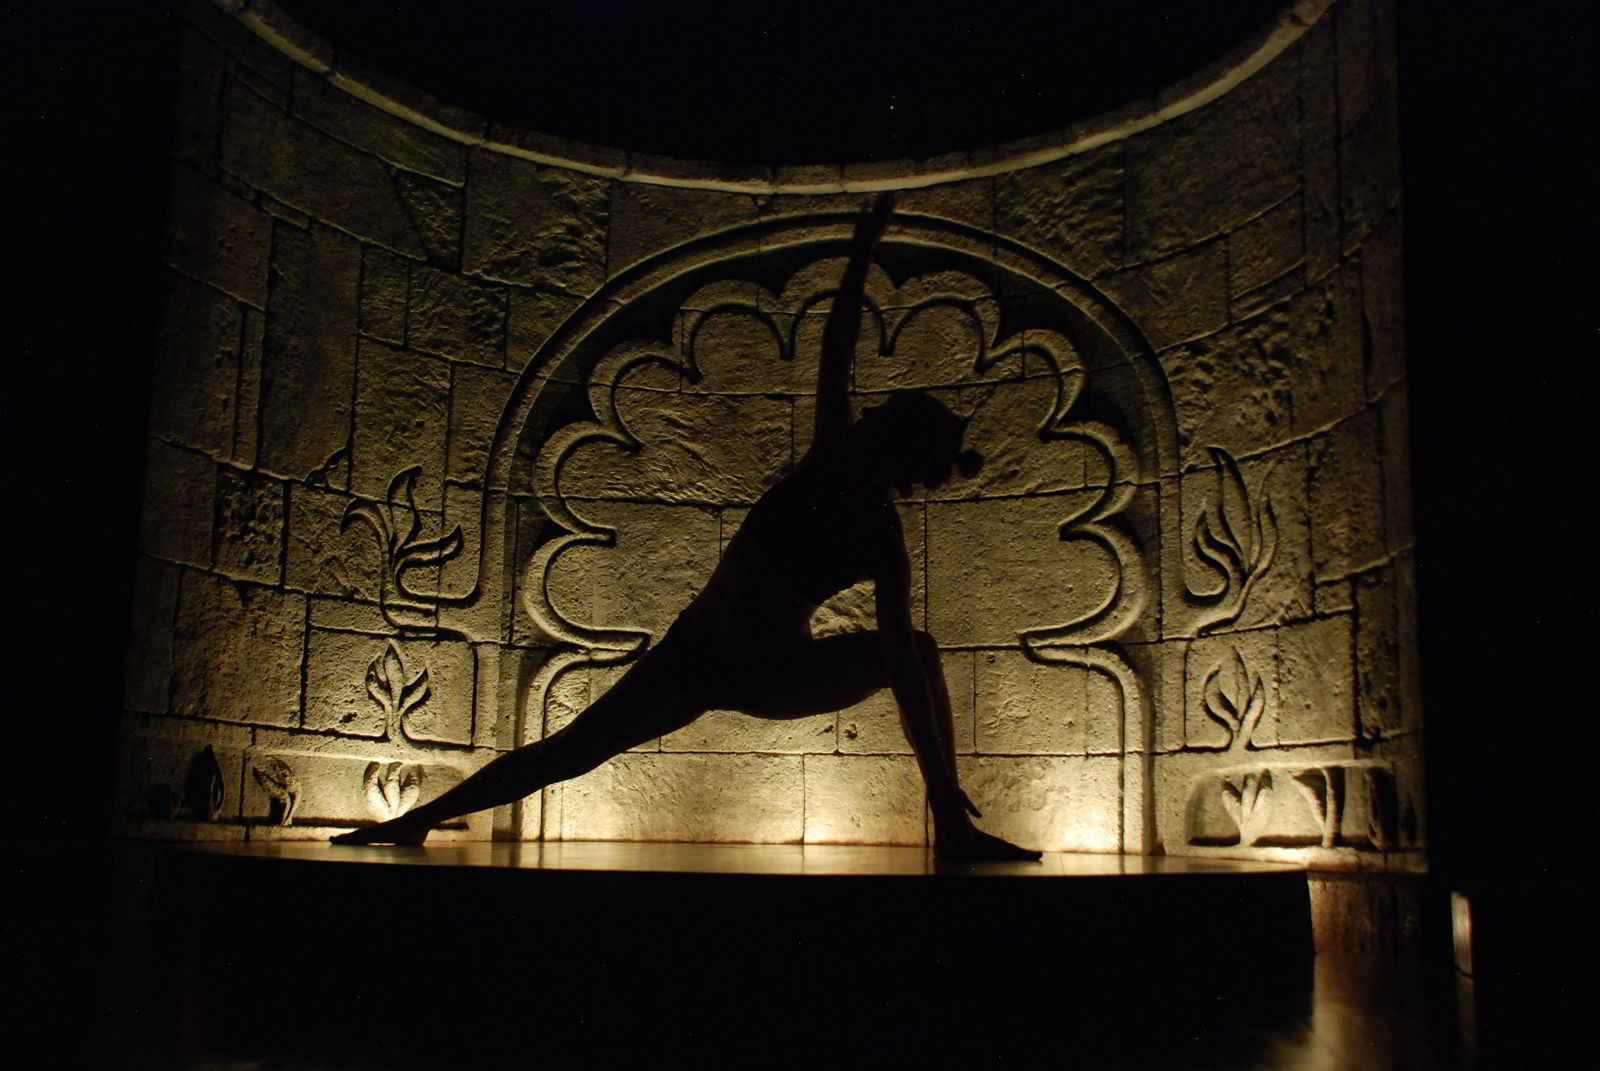 An image of a silhouette of woman doing a yoga pose.